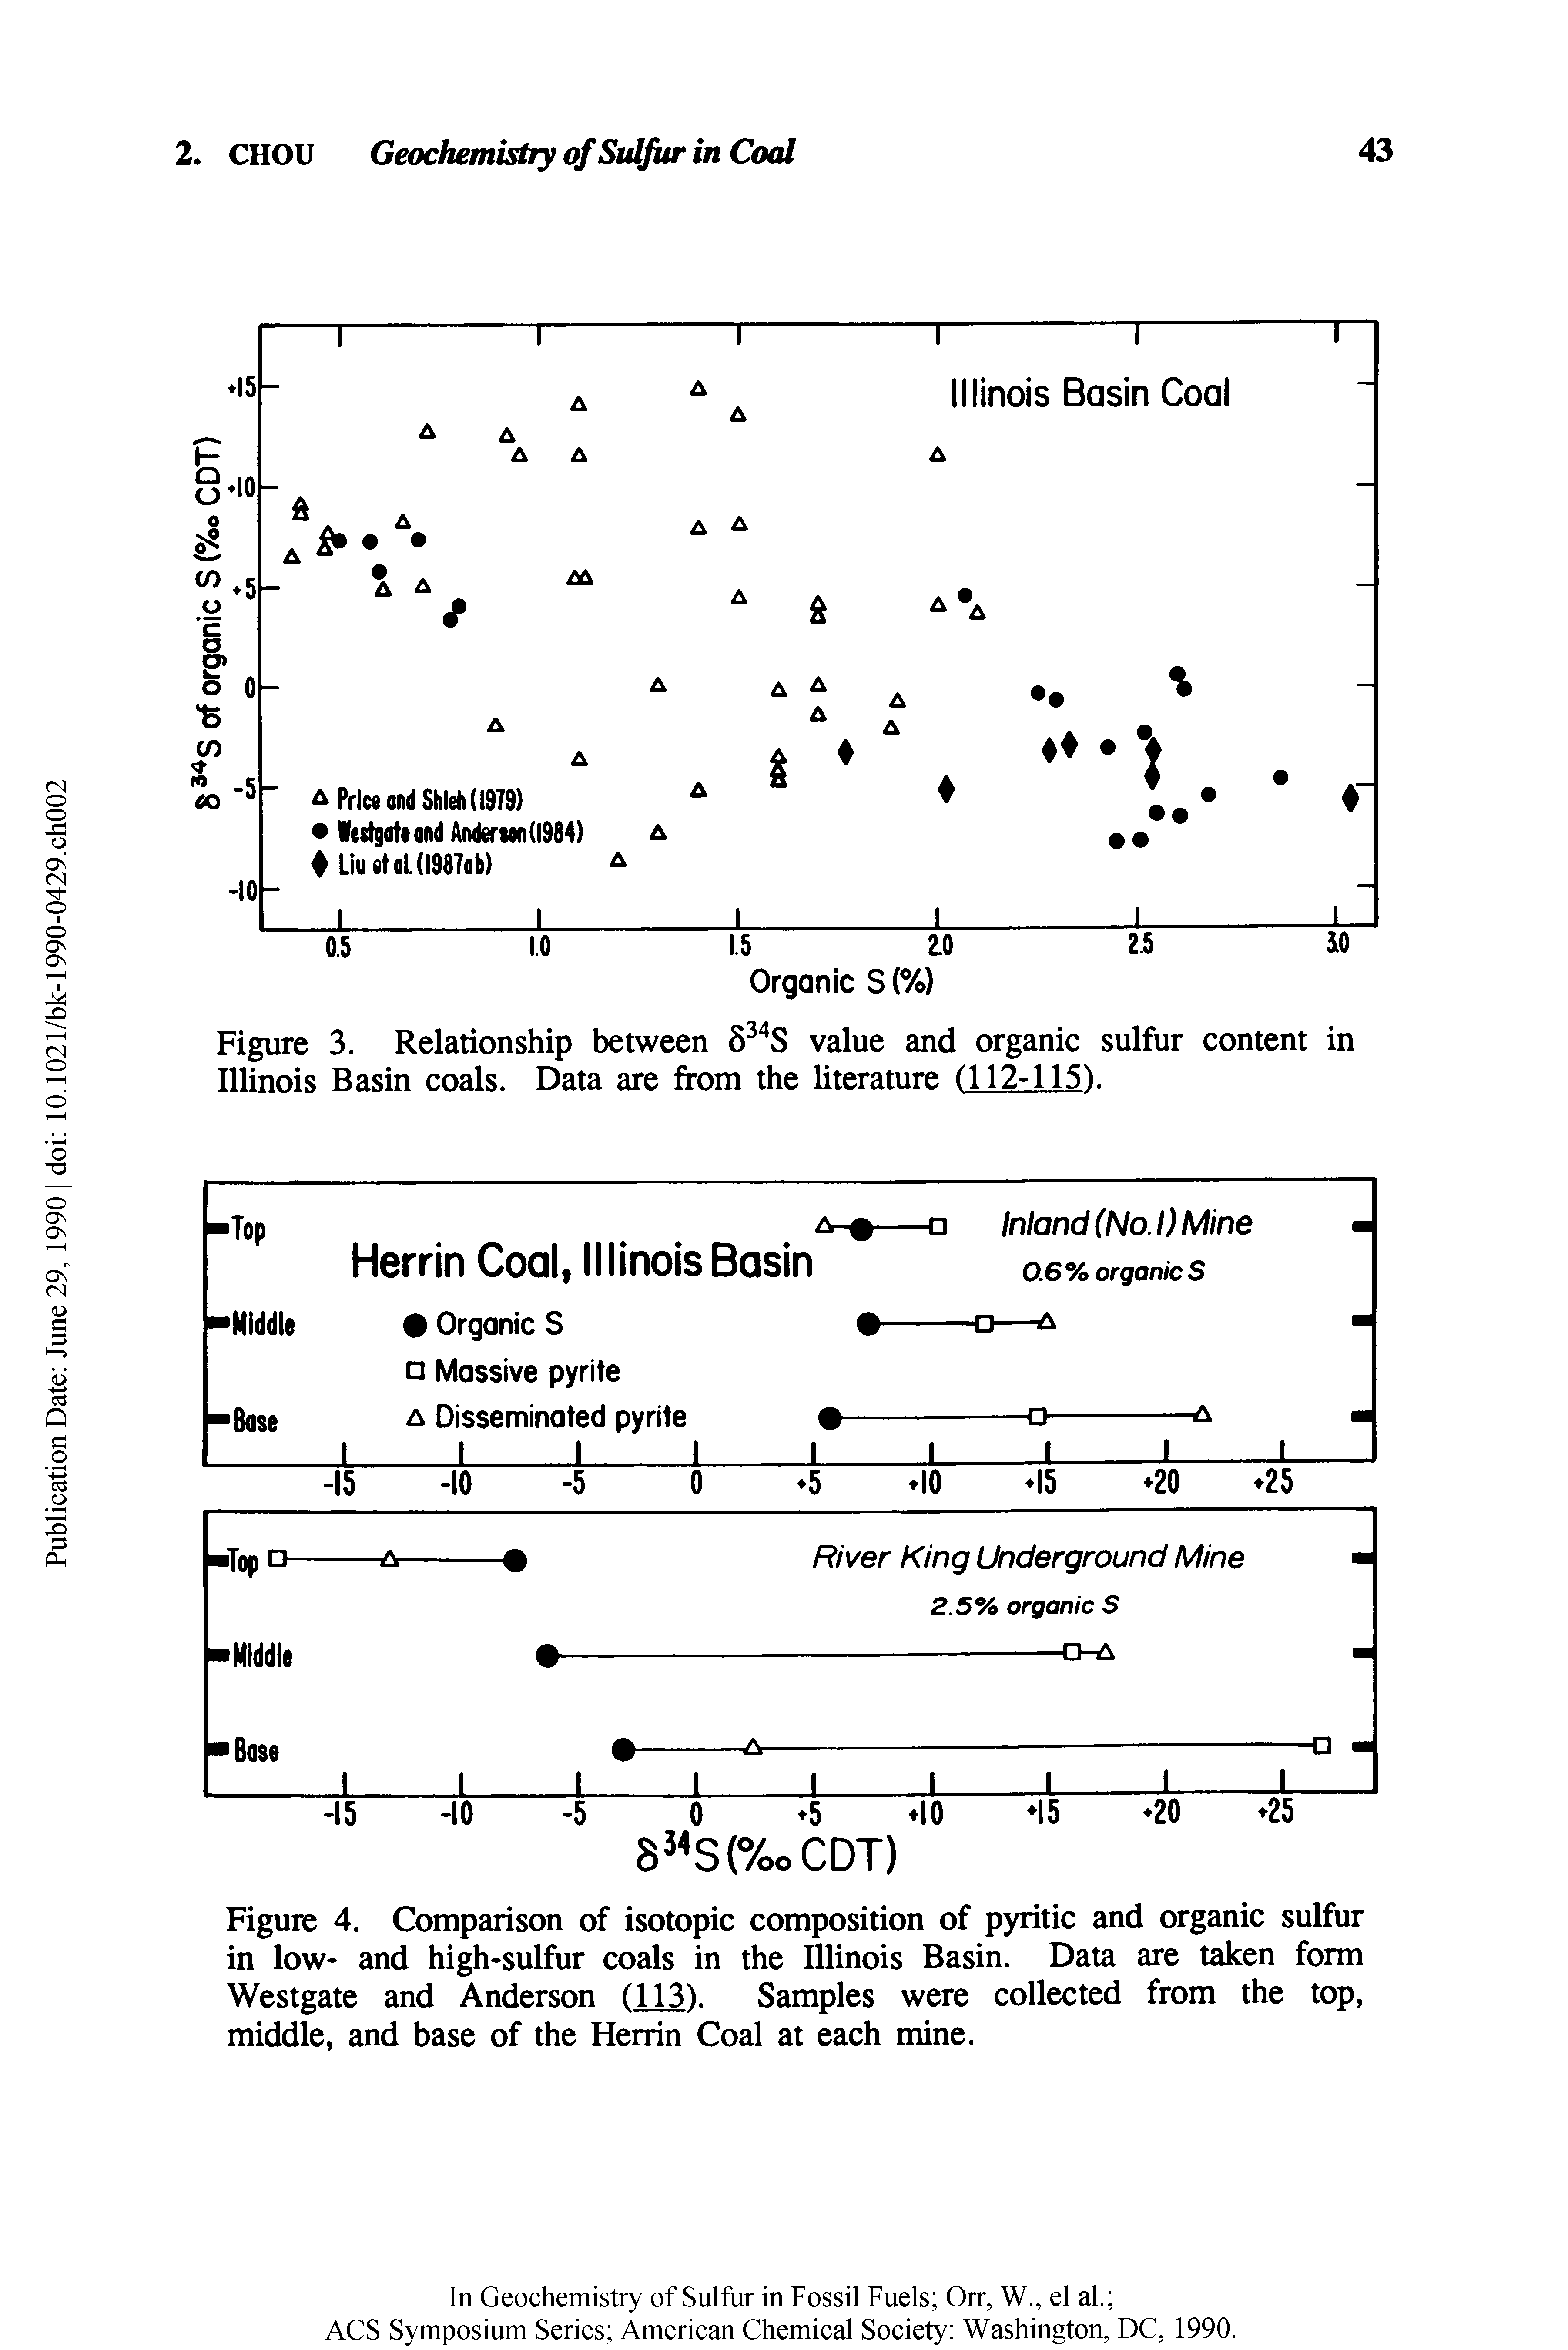 Figure 4. Comparison of isotopic composition of pyritic and organic sulfur in low- and high-sulfur coals in the Illinois Basin. Data are taken form Westgate and Anderson (113). Samples were collected from the top, middle, and base of the Herrin Coal at each mine.